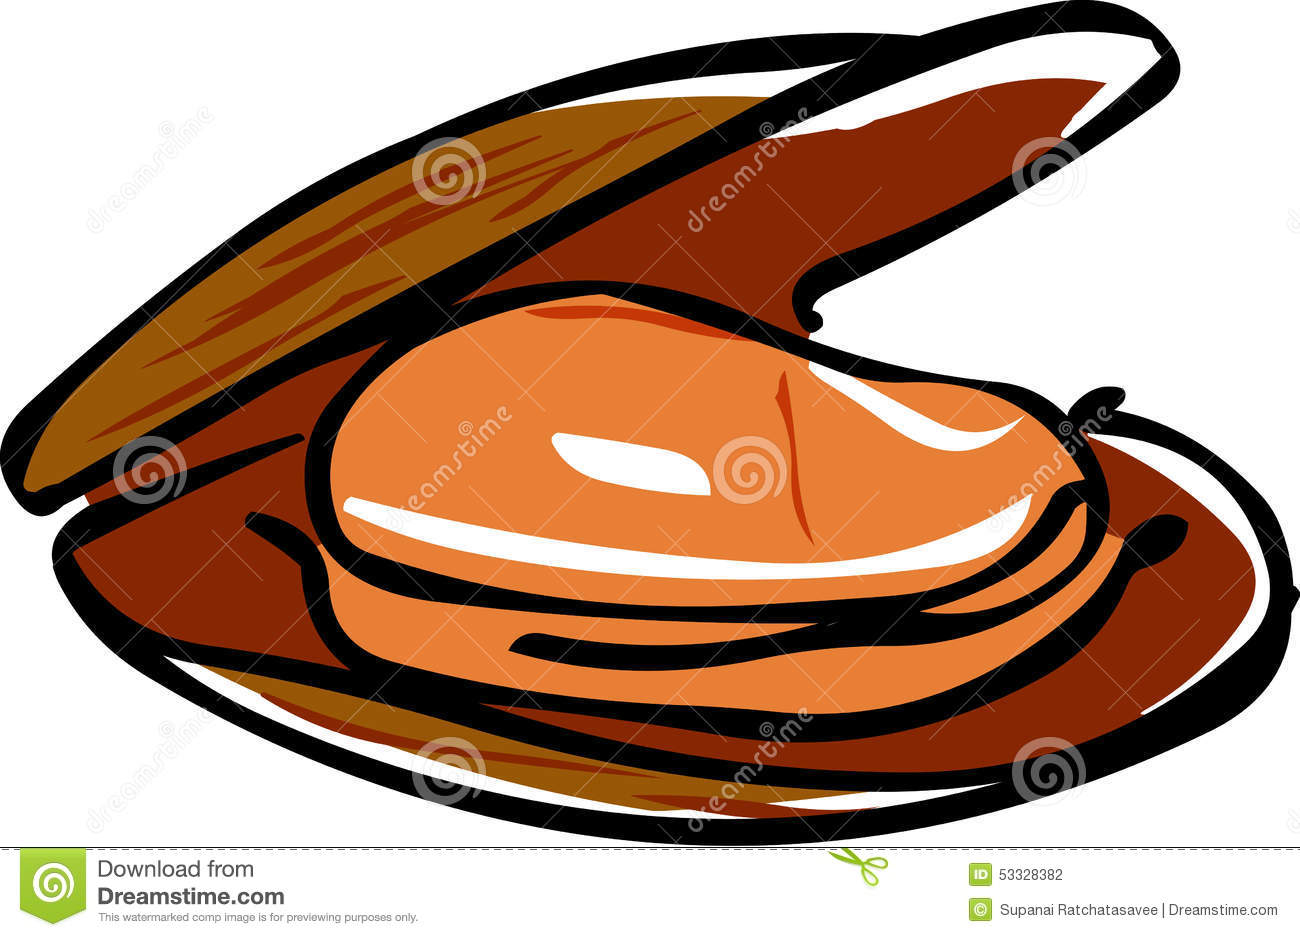 Mussel clipart #6, Download drawings